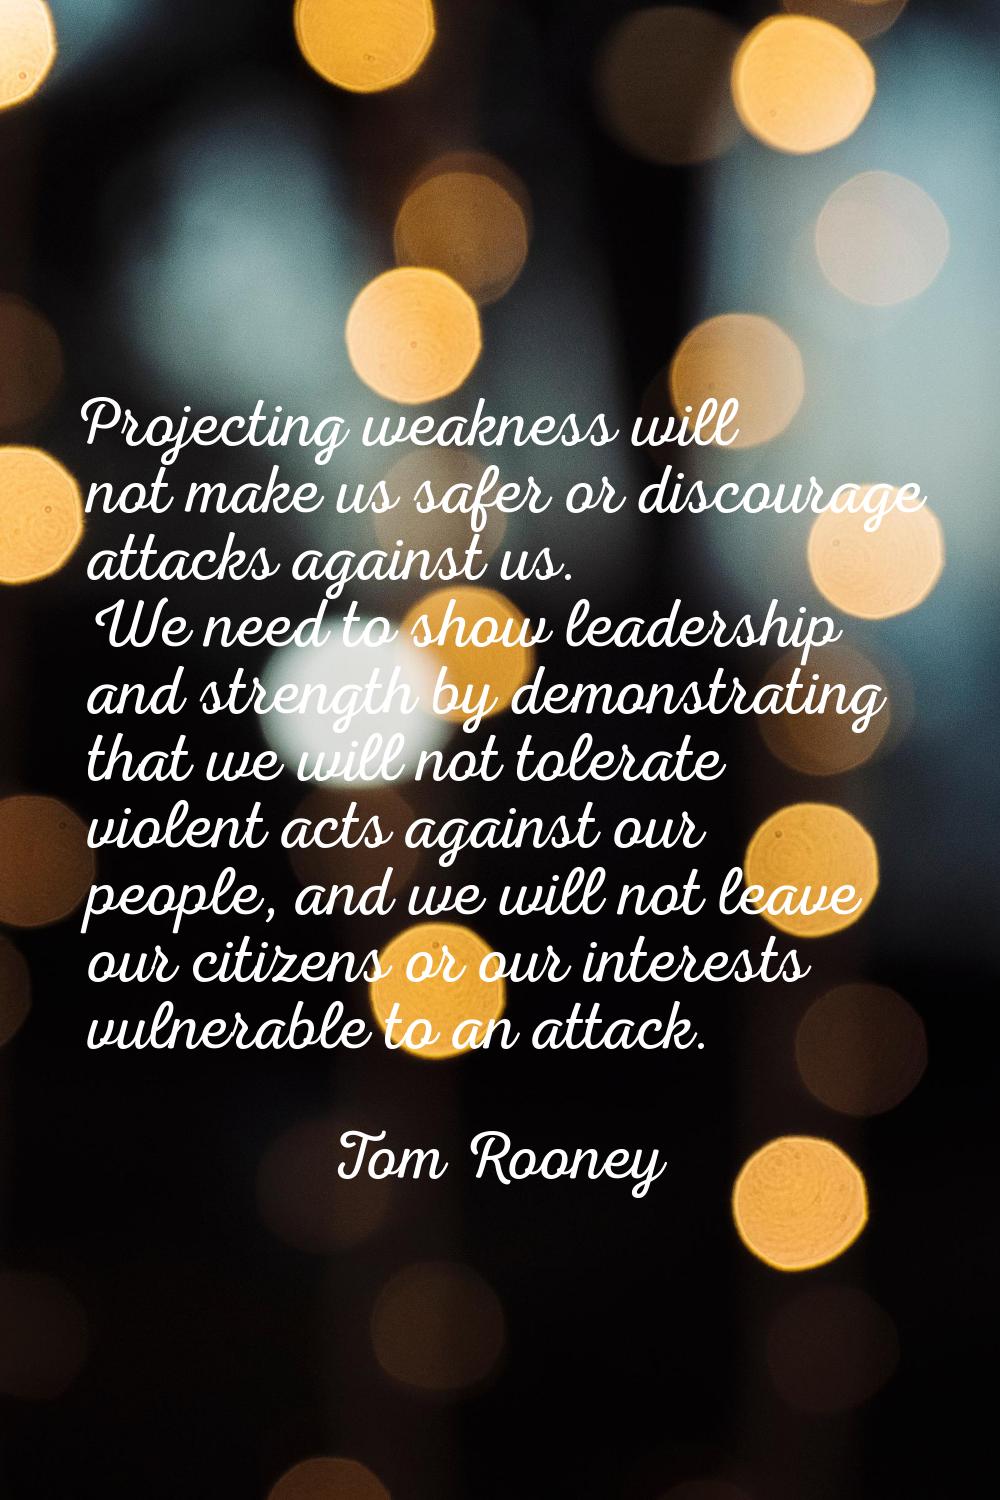 Projecting weakness will not make us safer or discourage attacks against us. We need to show leader